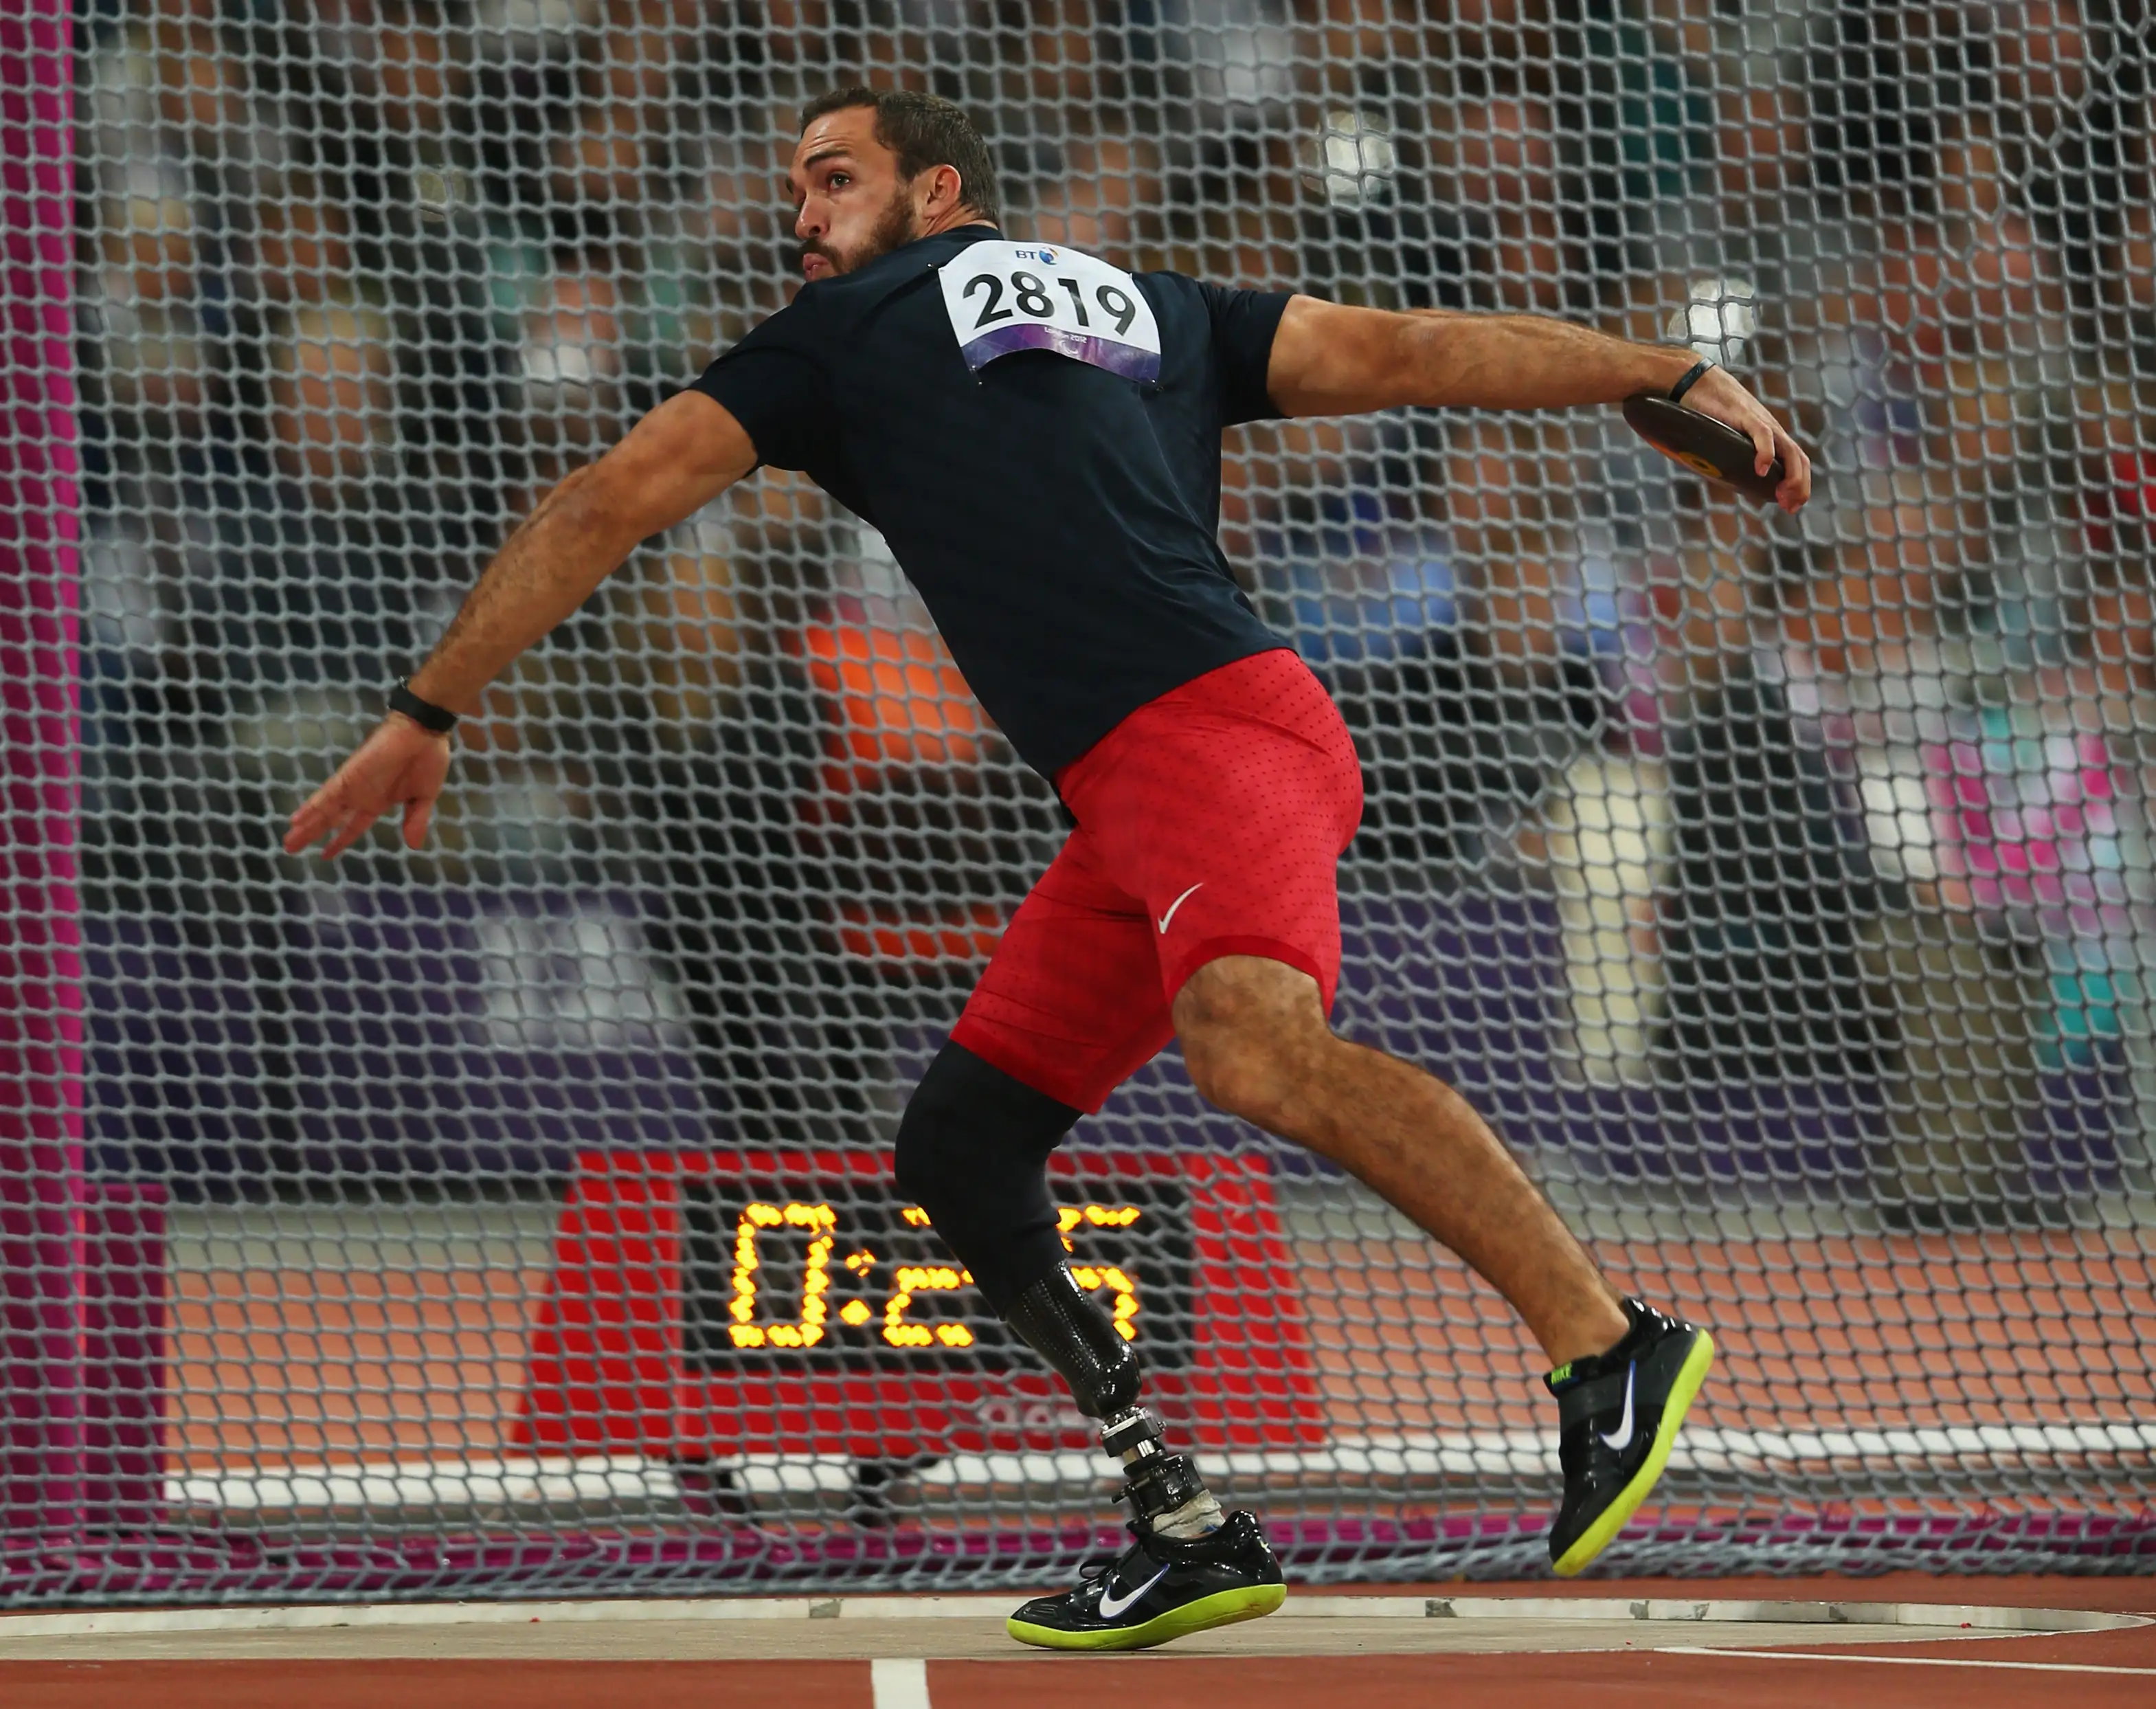 Jeremy Campbell of the United States competes in the Men's Discus Throw - F44 Final on day 8 of the London 2012 Paralympic Games at Olympic Stadium on September 6, 2012 in London, England.